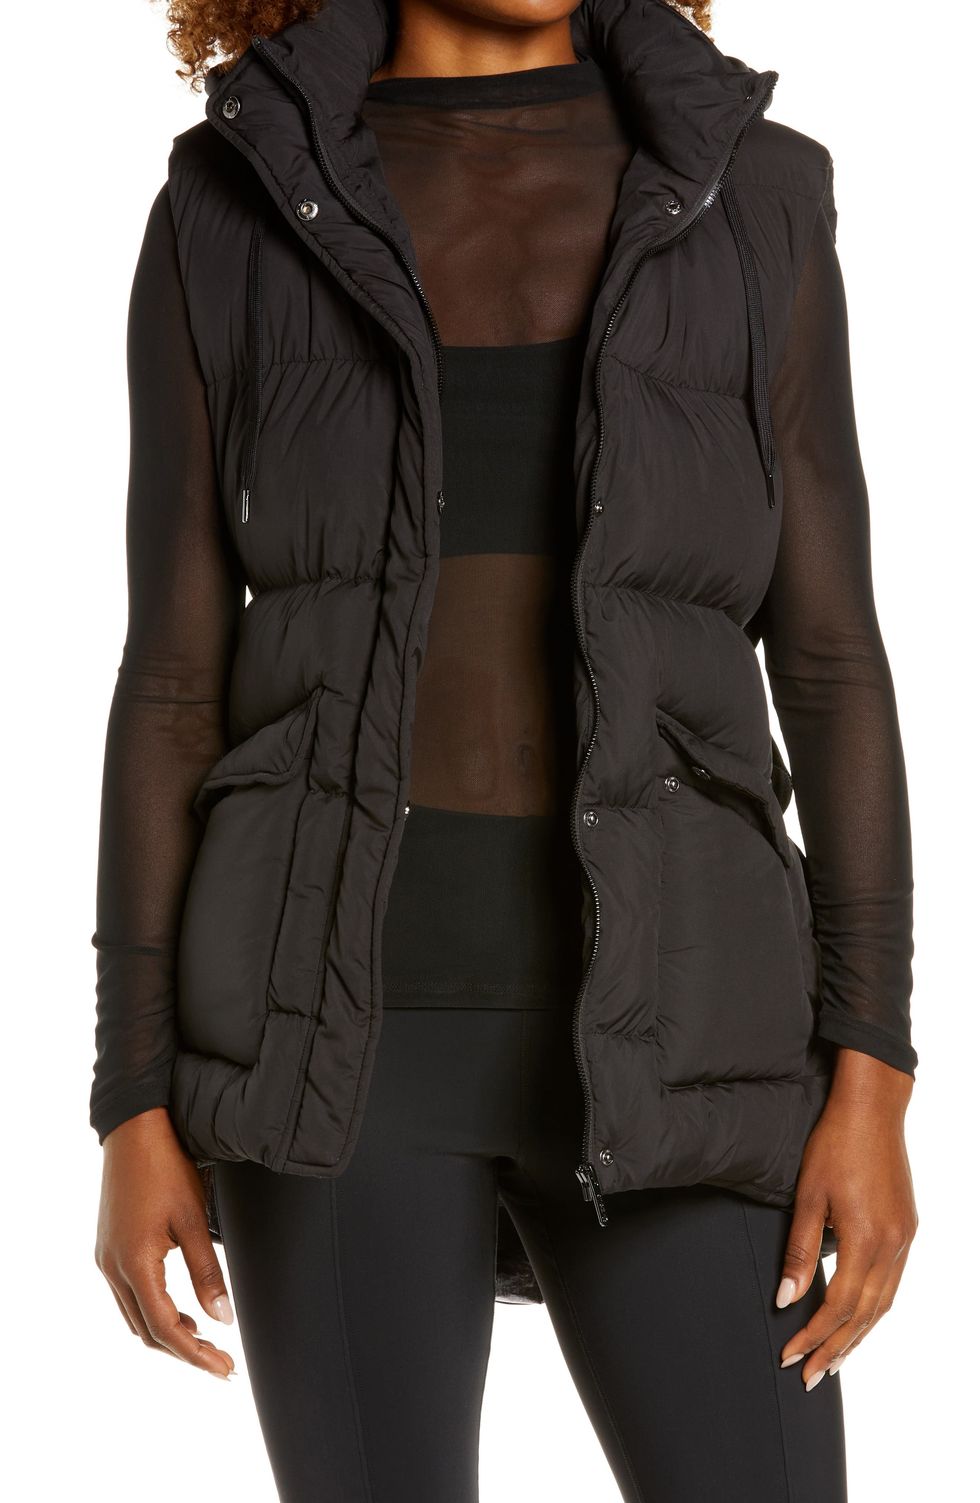 14 Womens Puffer Vests Great for Layering in Chilly Weather